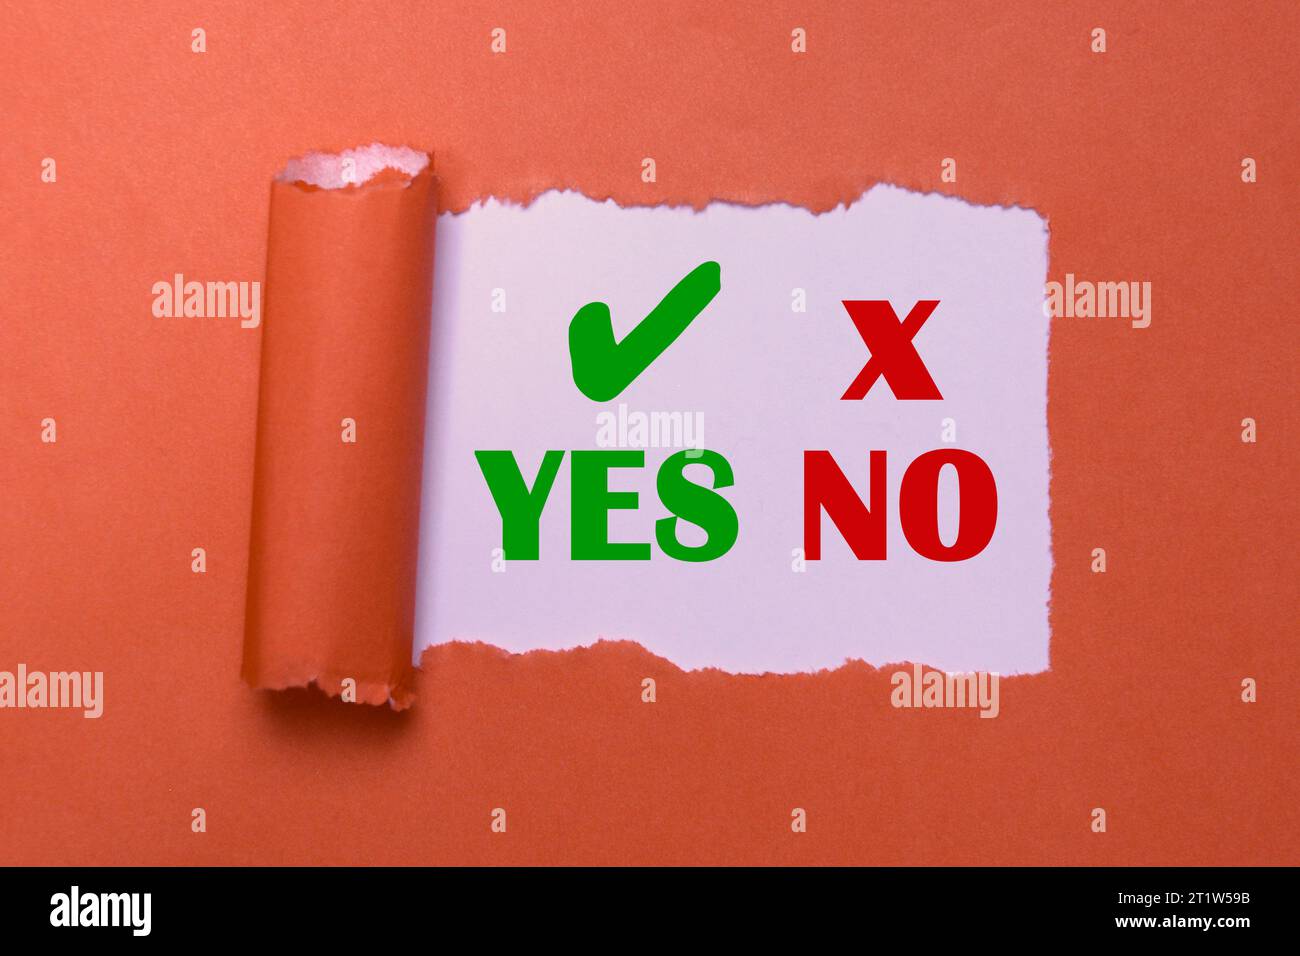 Yes or No Concept with Acceptance and Rejection Symbols. YES and NO Icons for Decision-Making. Voting Choices: Green YES and Red NO Symbols Stock Photo